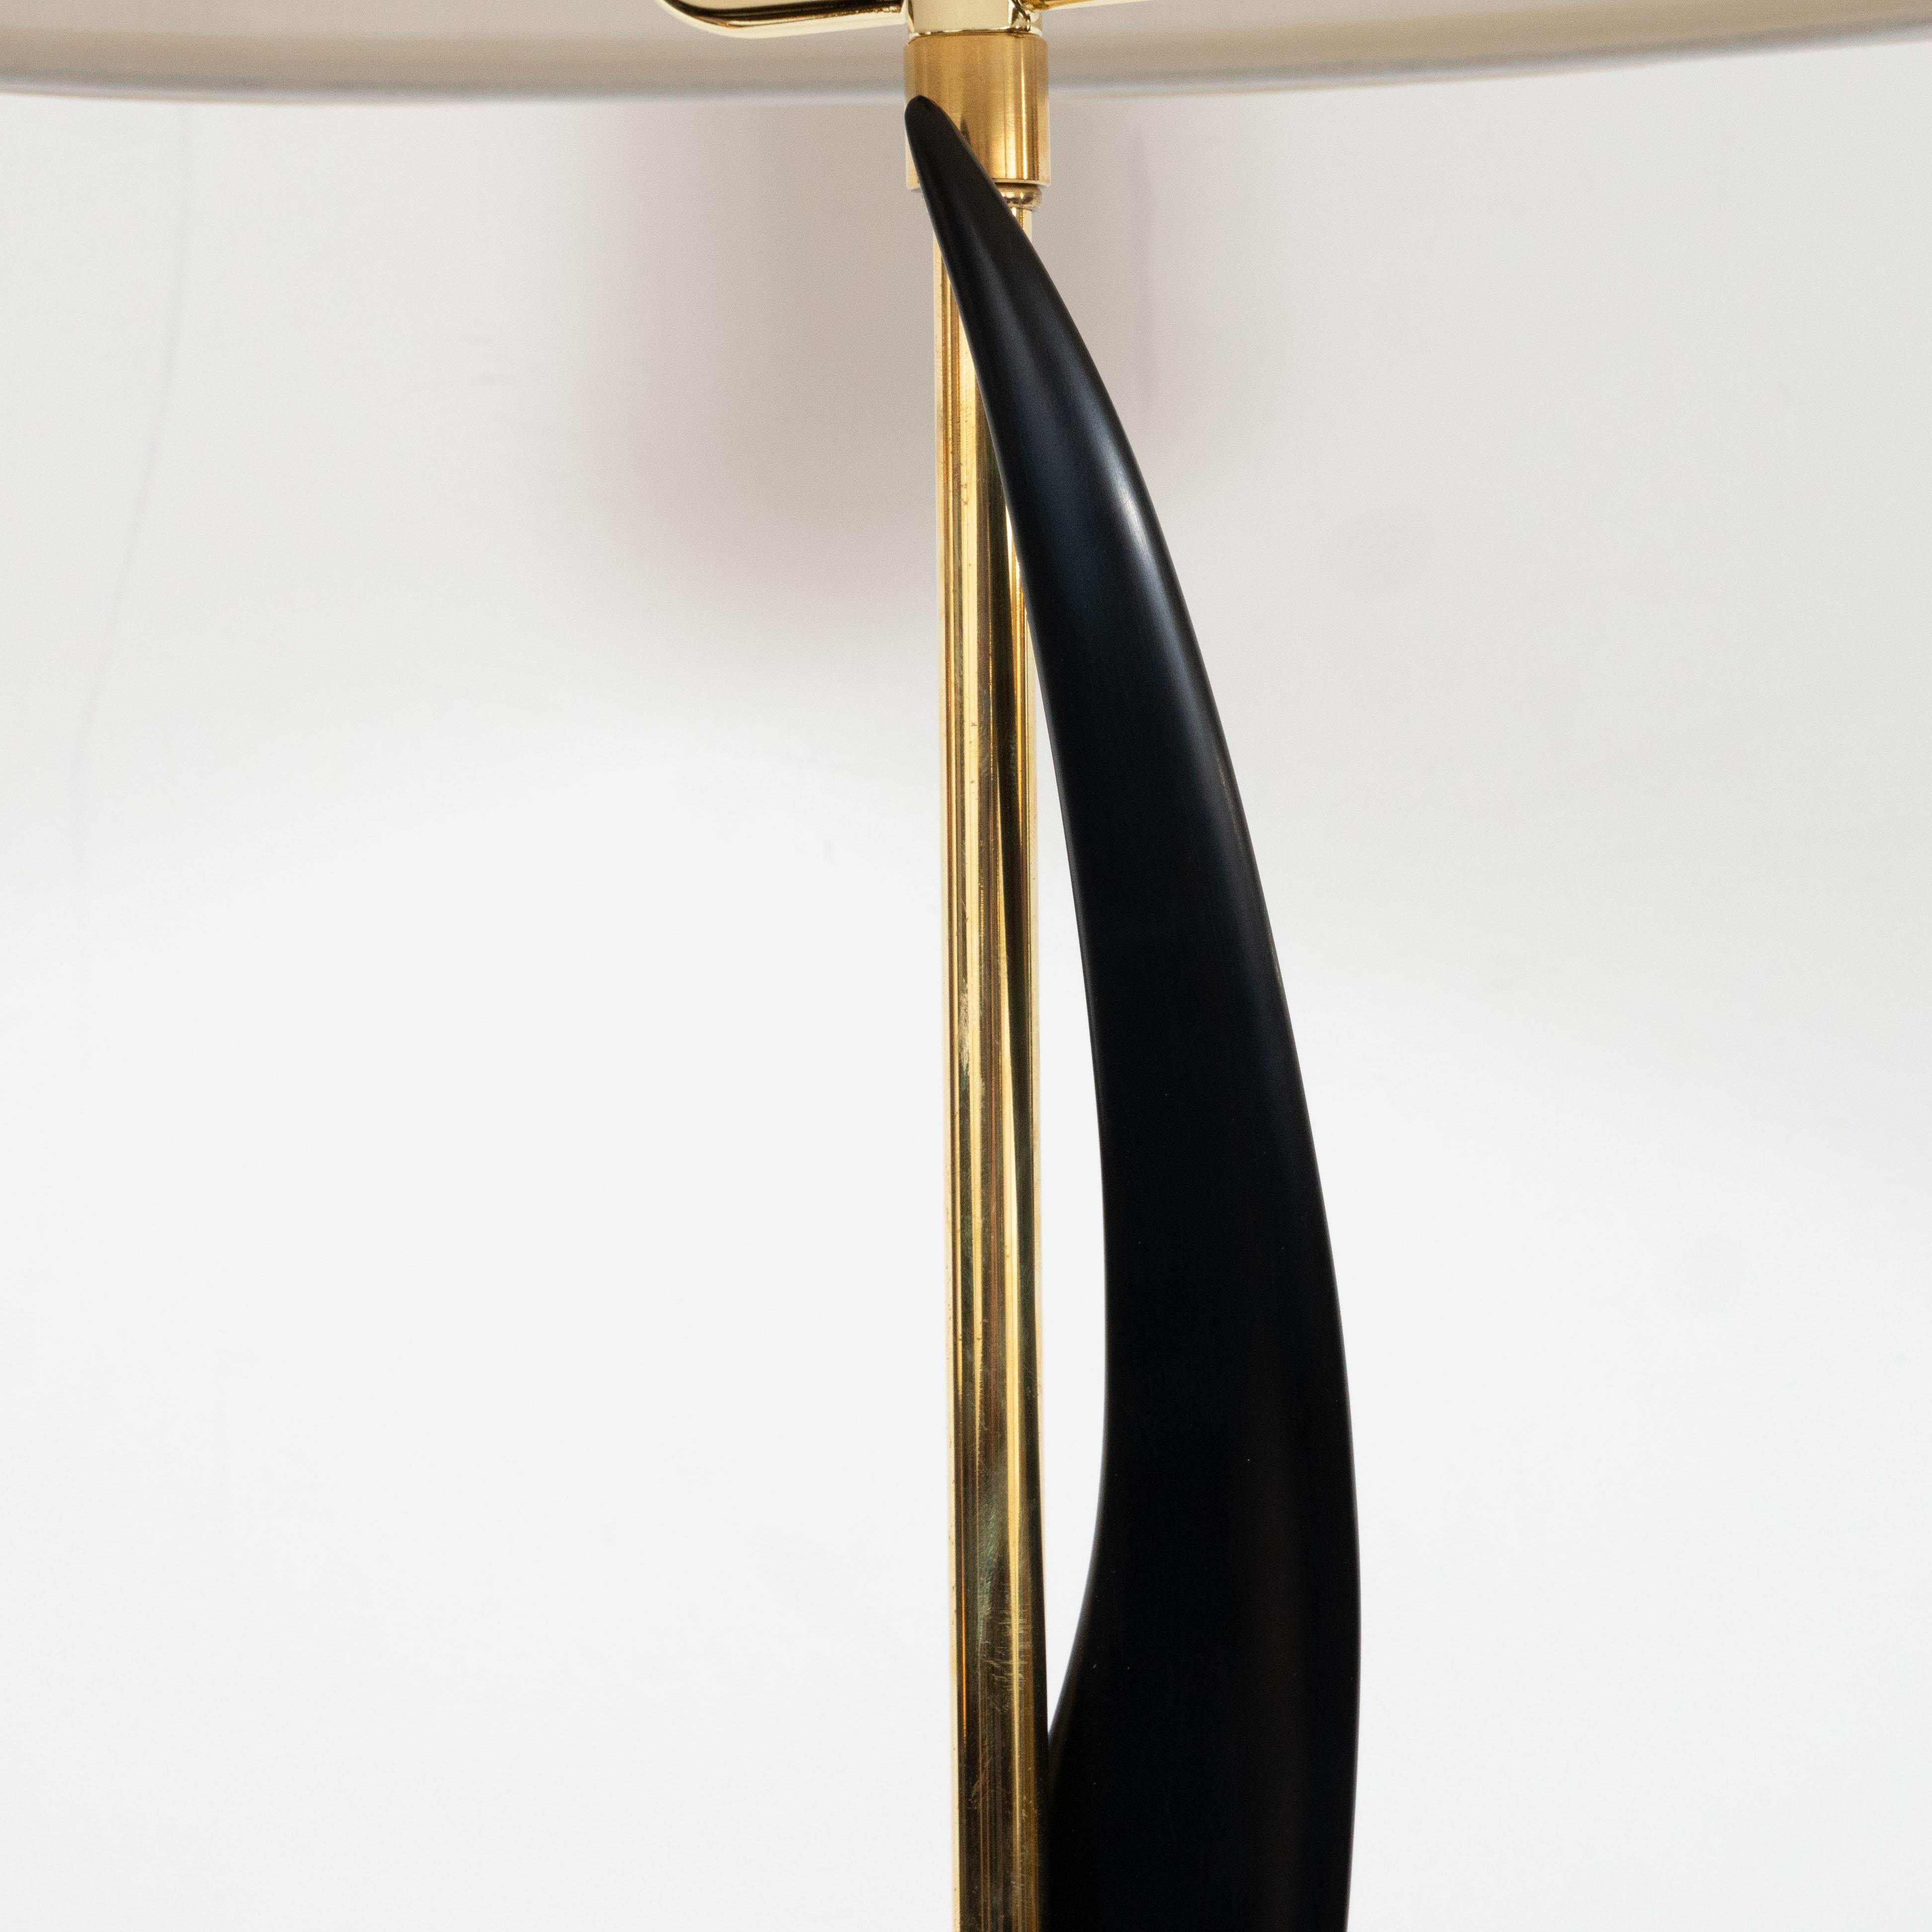 Late 20th Century Pair of Mid-Century Modern Spiral Form Ebonized Walnut and Brass Table Lamps